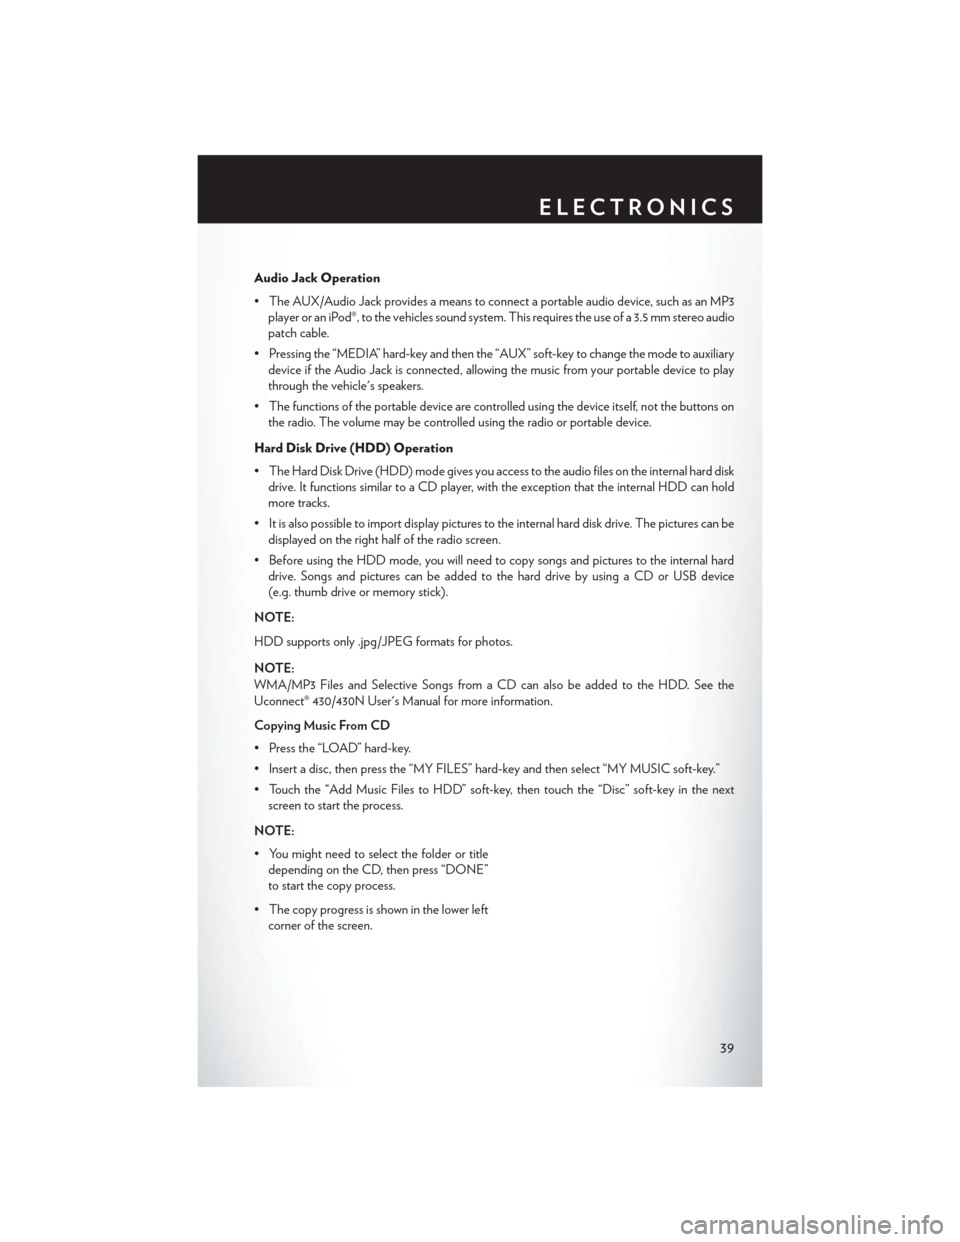 CHRYSLER 200 CONVERTIBLE 2013 1.G User Guide Audio Jack Operation
• The AUX/Audio Jack provides a means to connect a portable audio device, such as an MP3player or an iPod®, to the vehicles sound system. This requires the use of a 3.5 mm ster